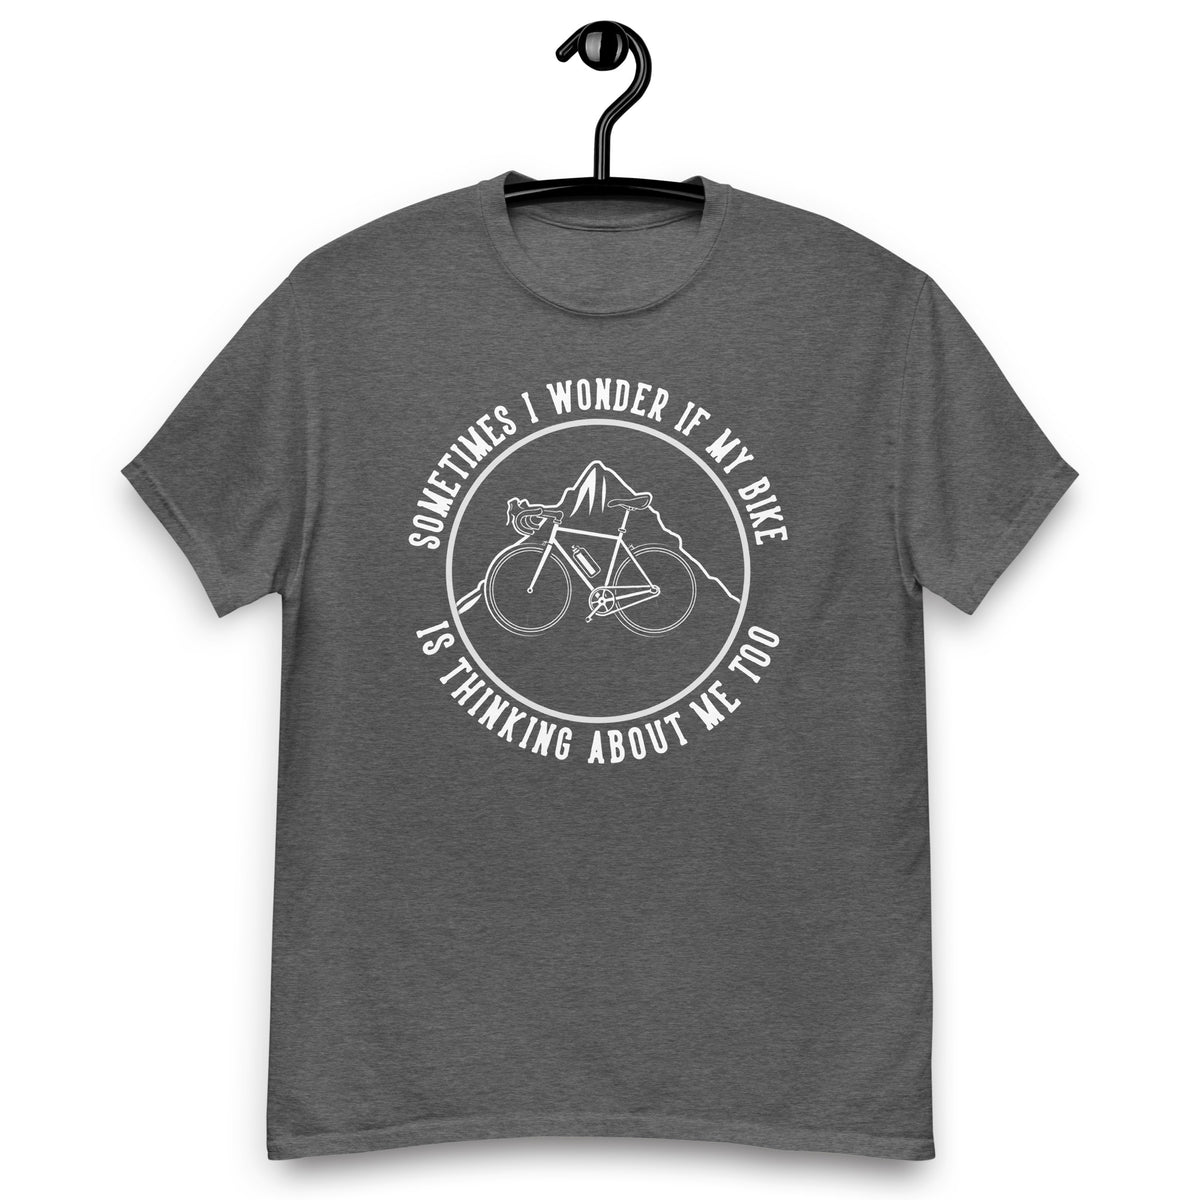 Fahrrad Shirts "Sometimes I Wonder If My Bike Is Thinking About Me Too" Variane 1